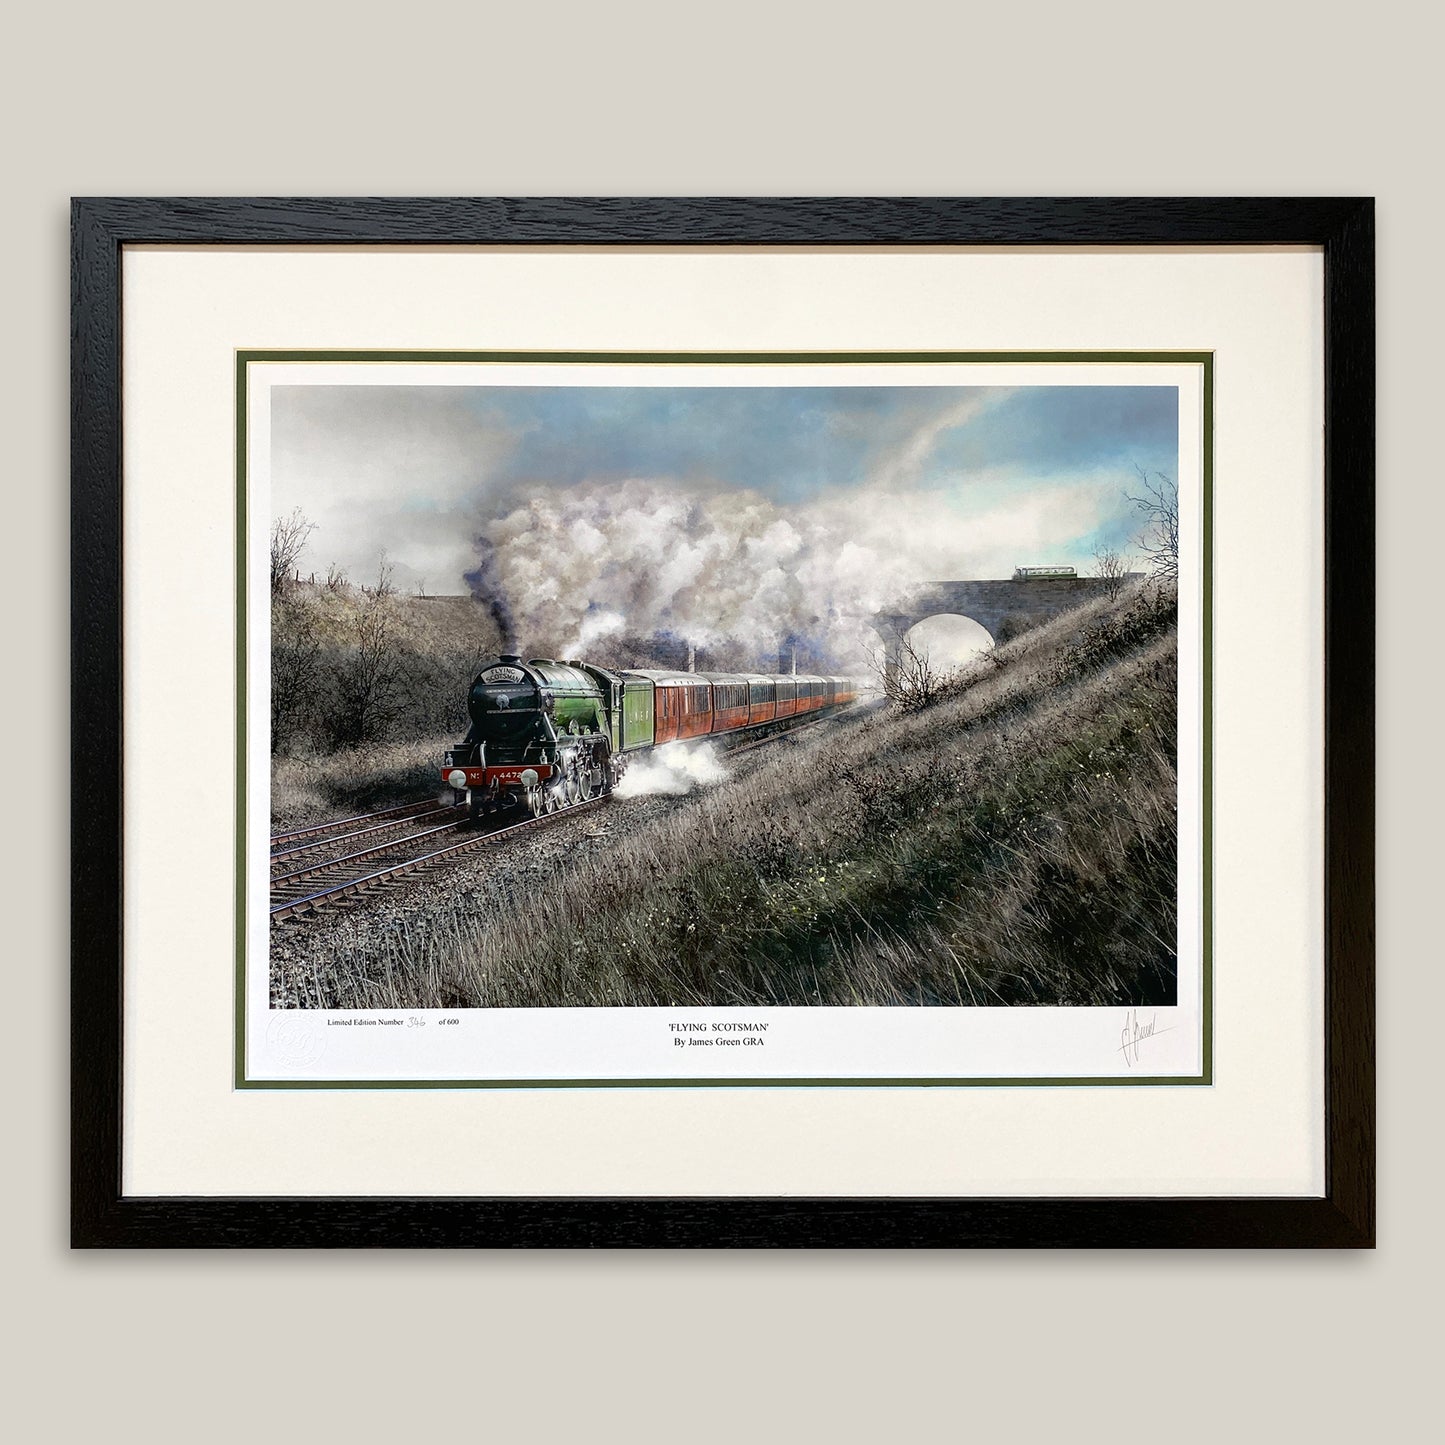 Framed print of Flying Scotsman steam train going under a viaduct, painting by guild of railway artist James Green